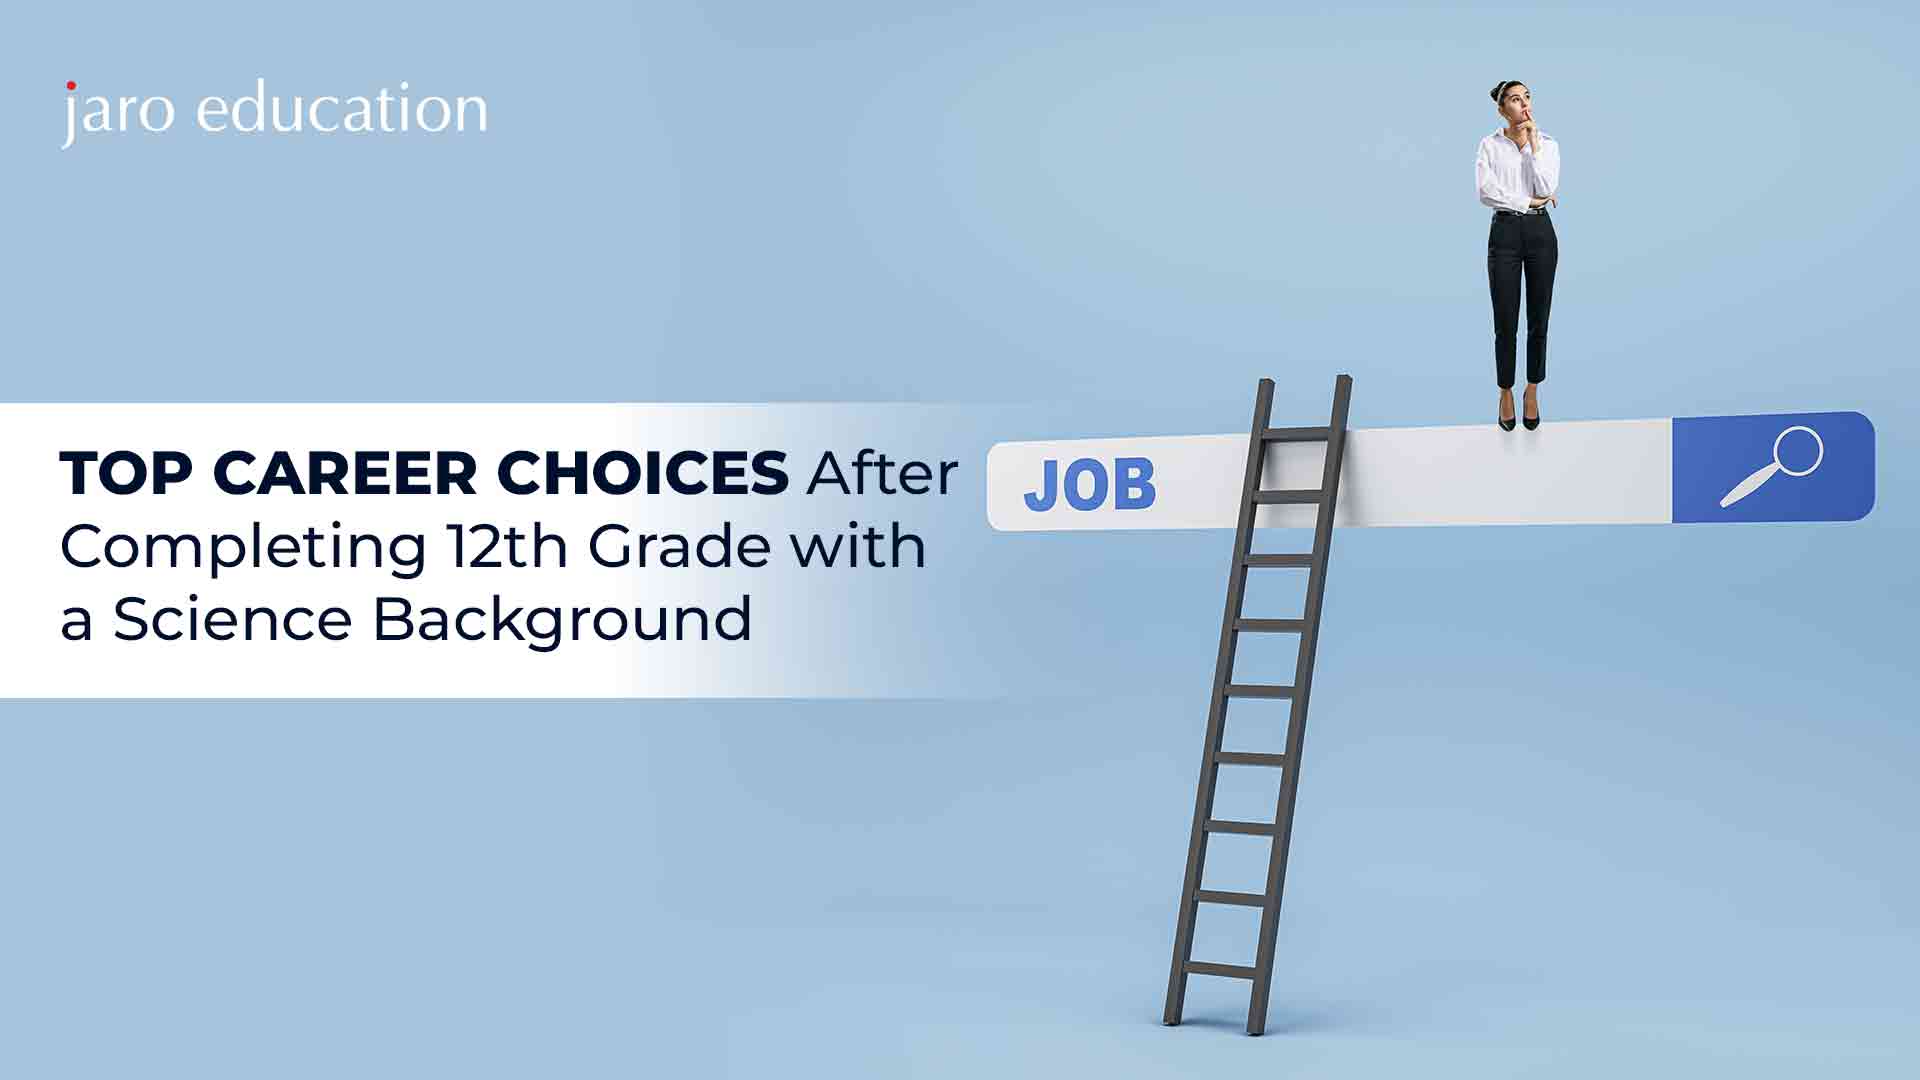 Top Career Choices After Completing 12th Grade with a Science Background